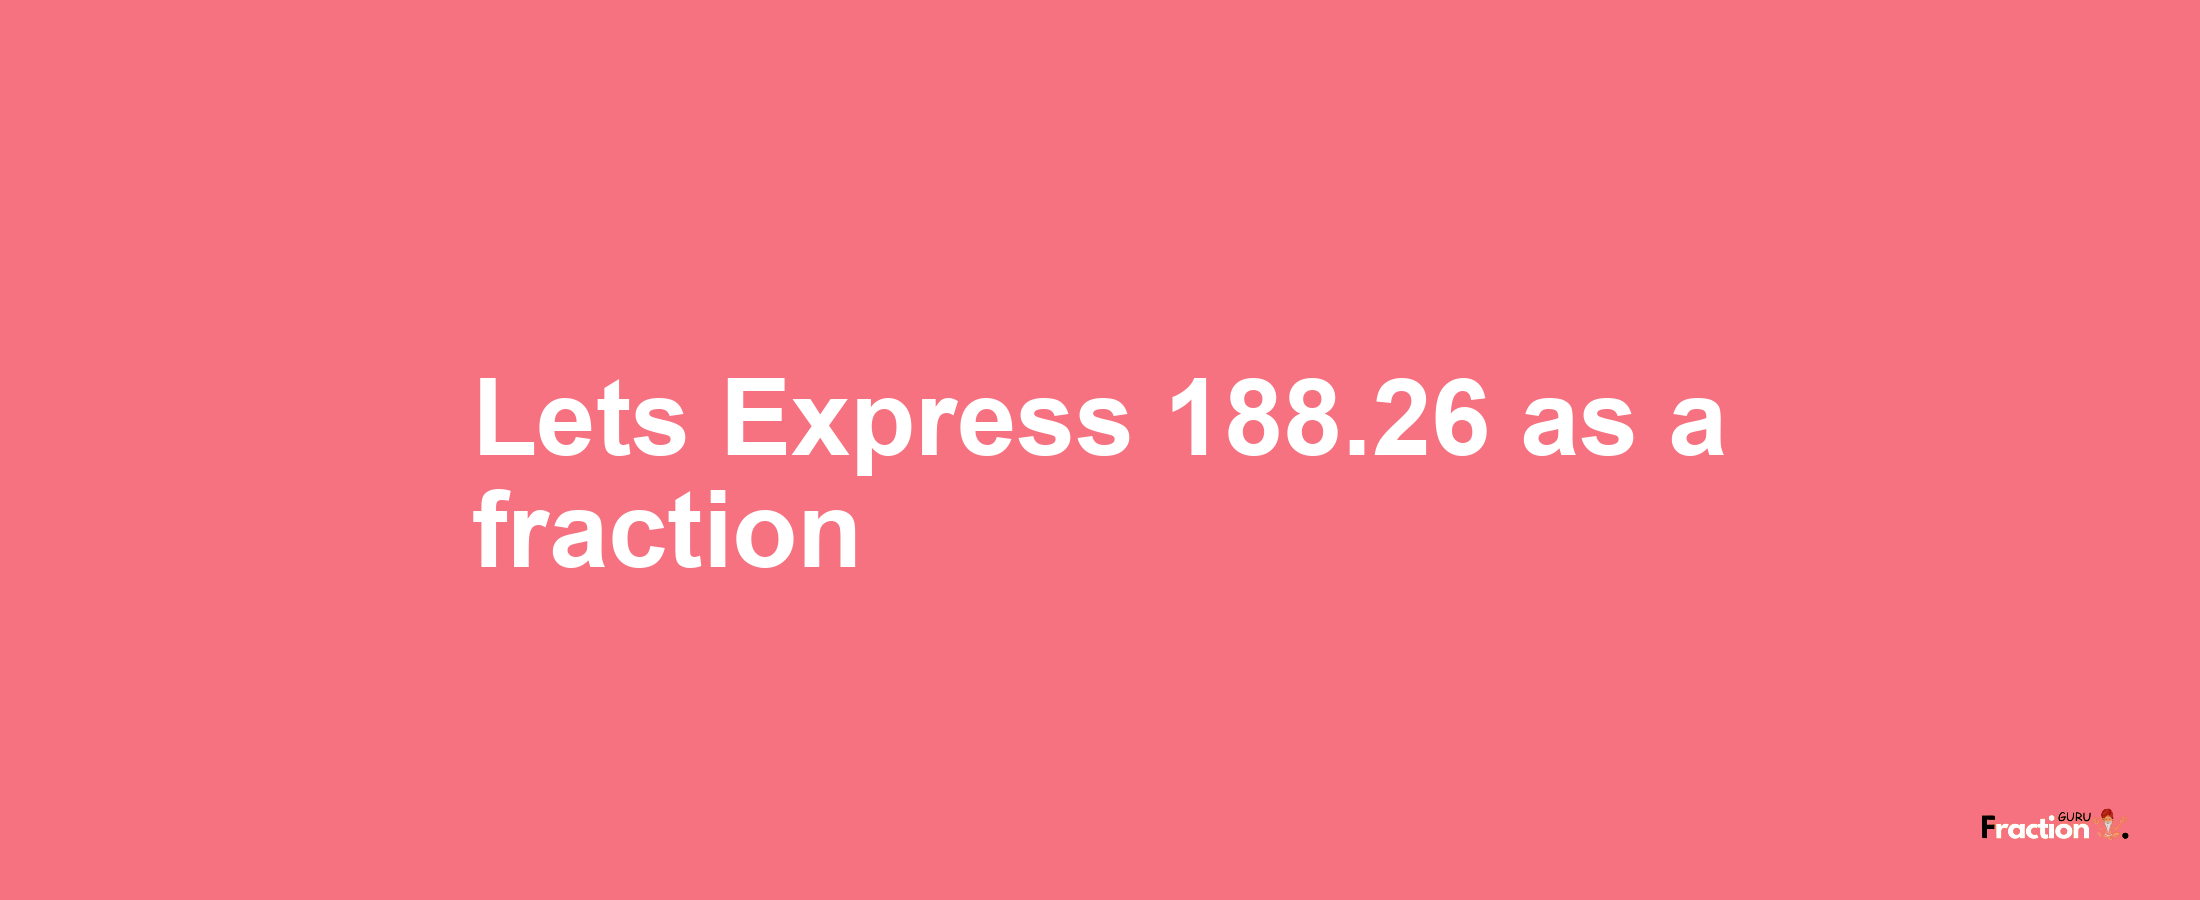 Lets Express 188.26 as afraction